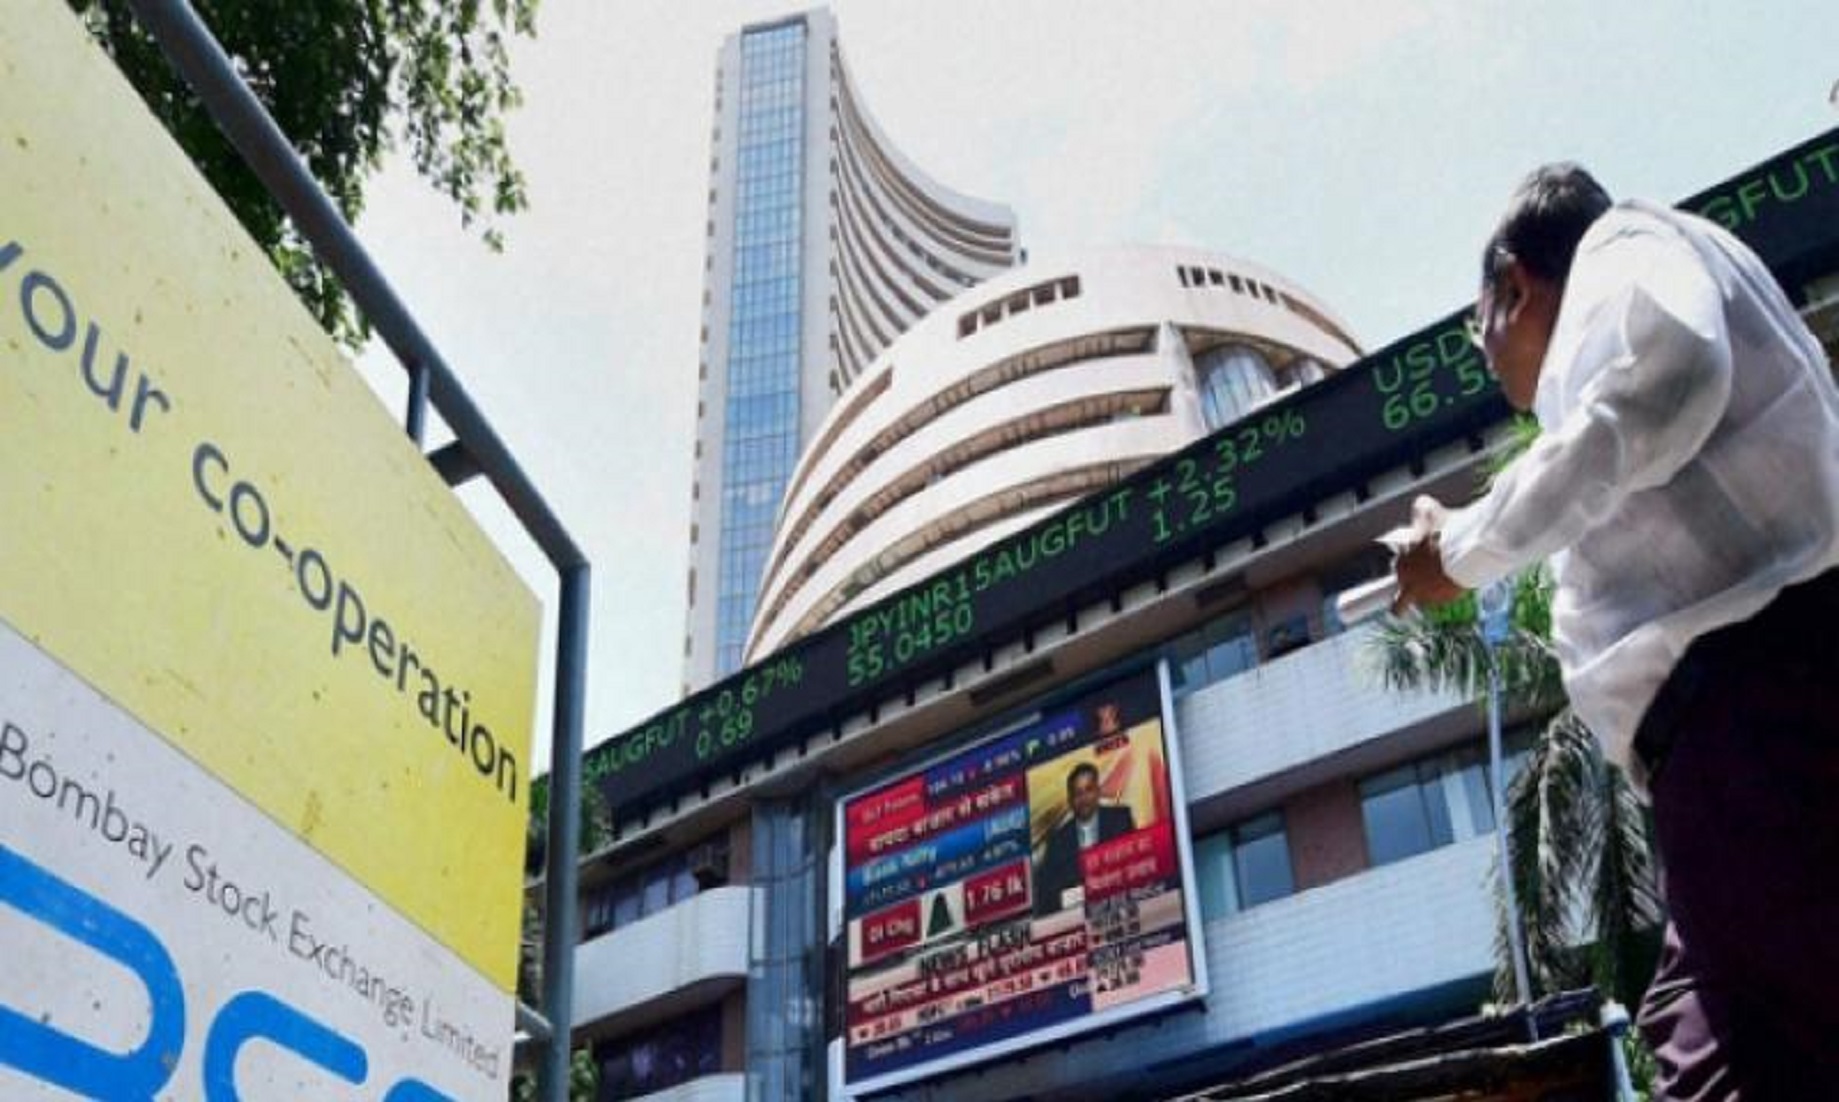 Indian Capital Market To See Continued IPO Frenzy With New Listings In Jan-Mar